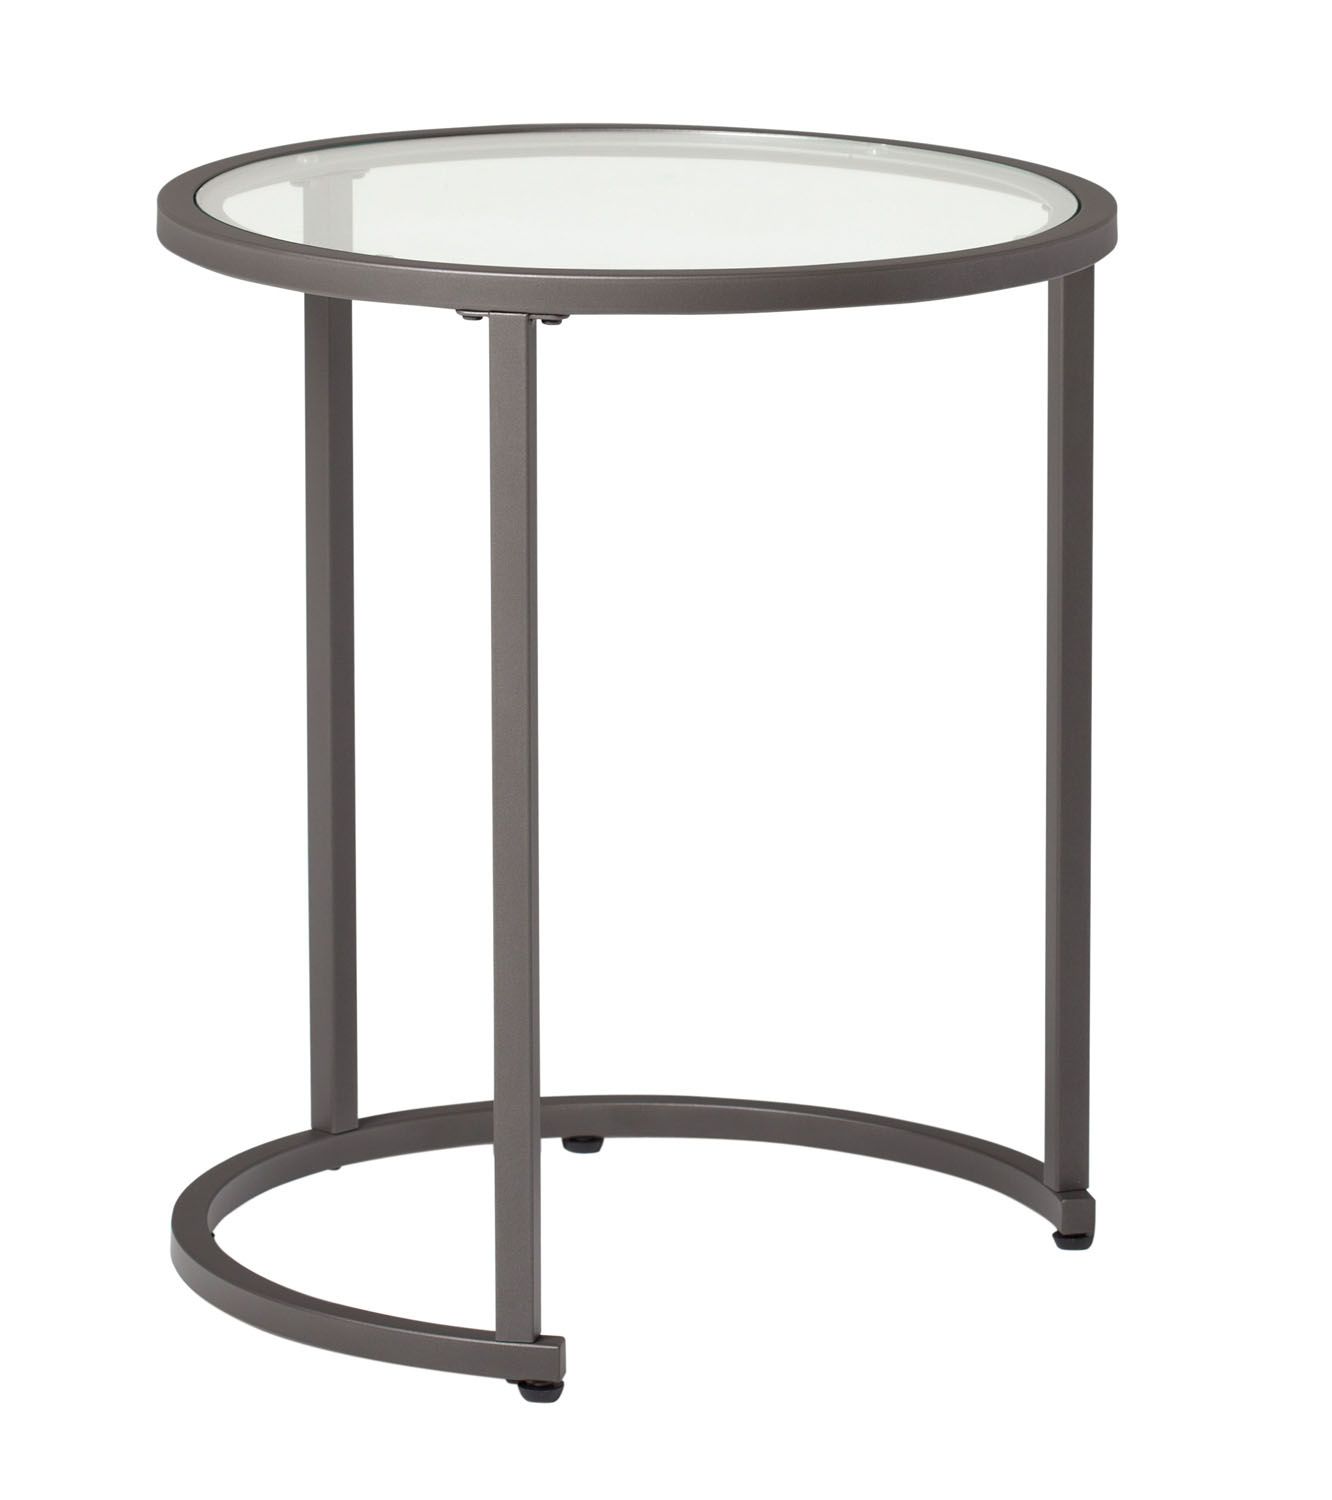 Offex Modern Glass Round Nesting Tables In Pewter 20 Inches – Walmart With Regard To Glass And Pewter Rectangular Desks (View 3 of 15)